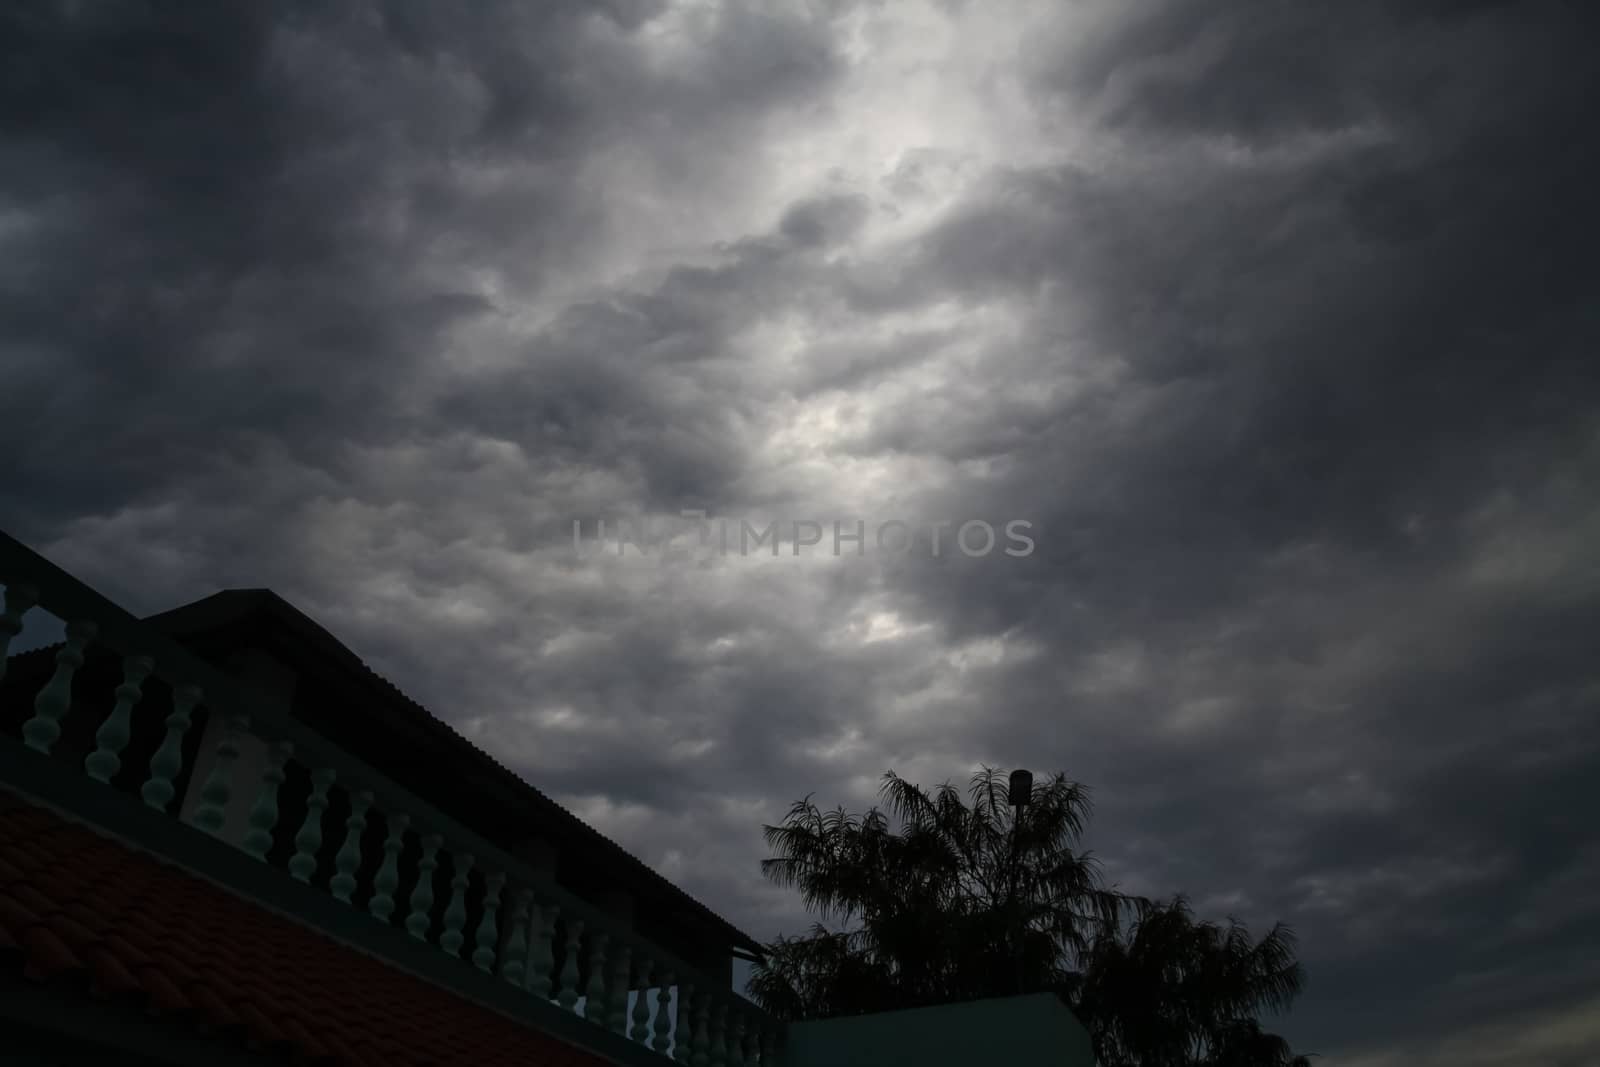 A view of dark menacing storm clouds encompassing the gray scale spectrum with part of the housetop and a tree top in the foreground providing a sense of scale